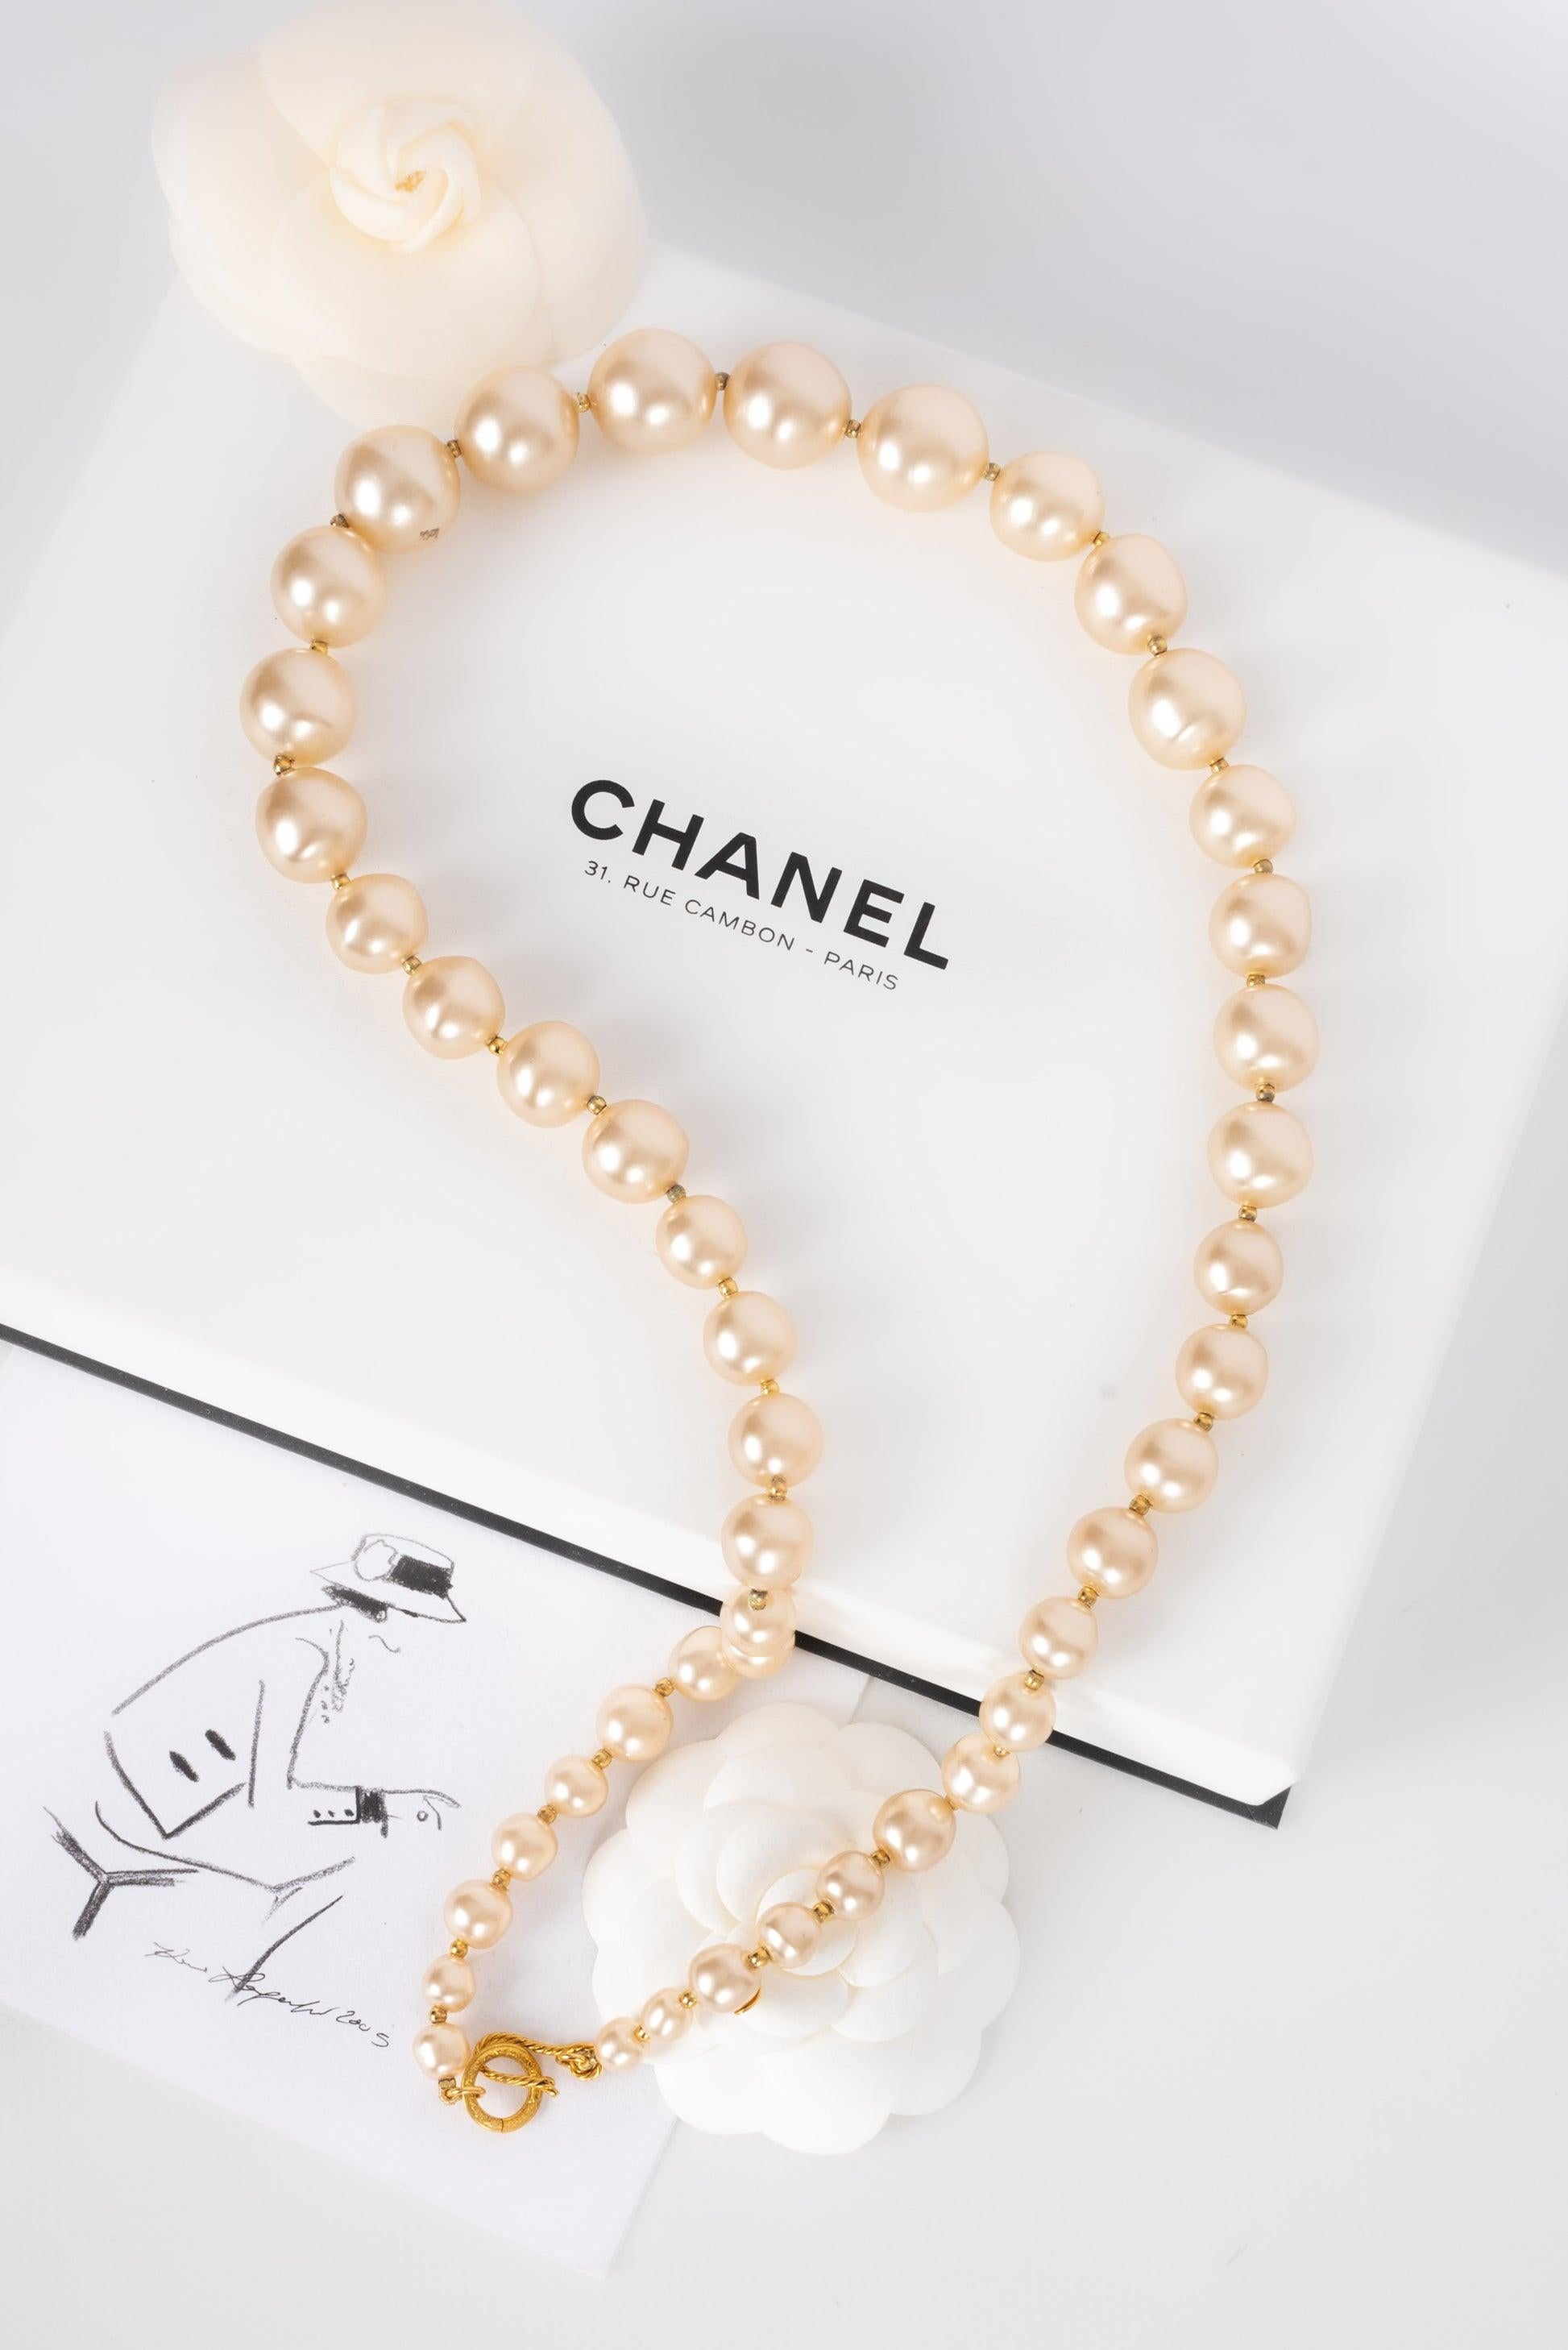 Chanel Necklace in Costume Pearly Beads and Gold-Plated Metal, 1990s For Sale 3